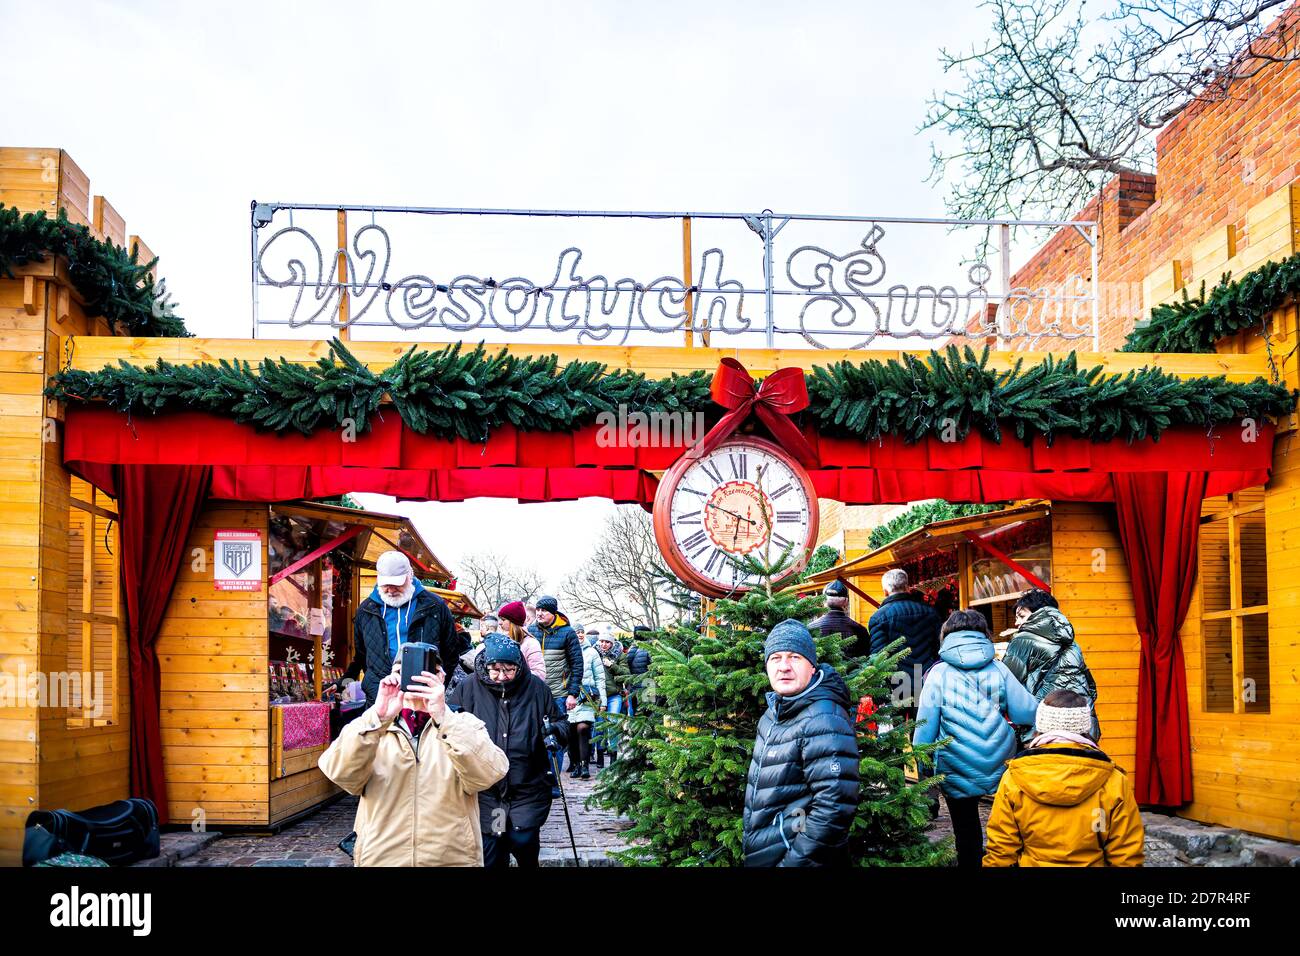 Warsaw, Poland - December 21, 2019: Old town Warszawa with Christmas market near royal castle square people walking by entrance with clock and Happy H Stock Photo